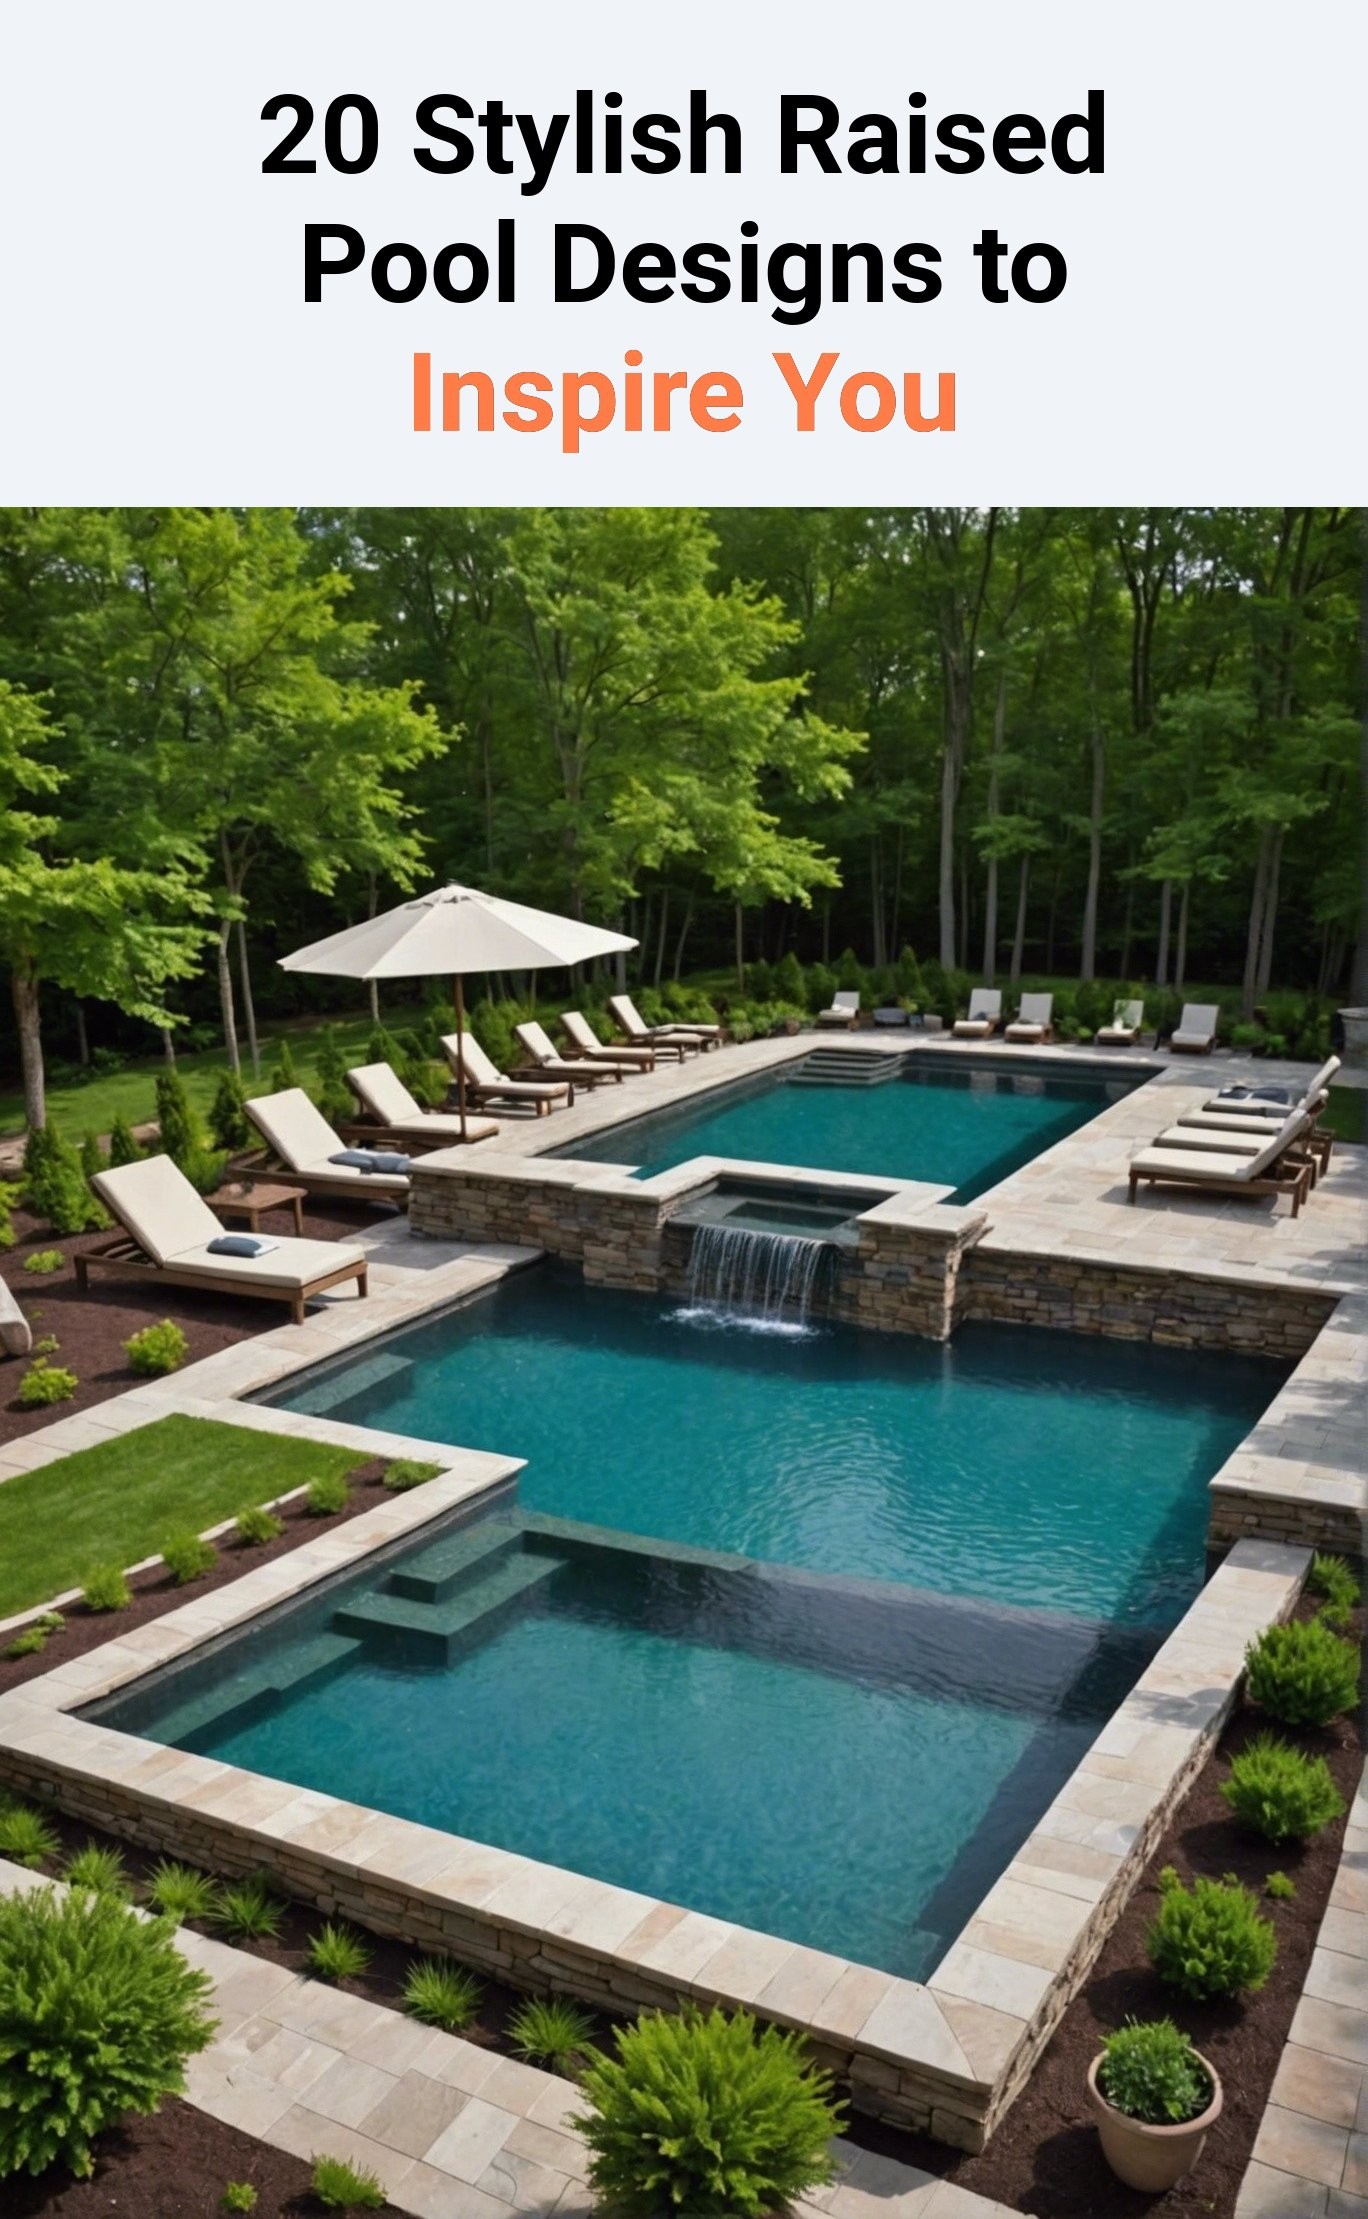 20 Stylish Raised Pool Designs to Inspire You